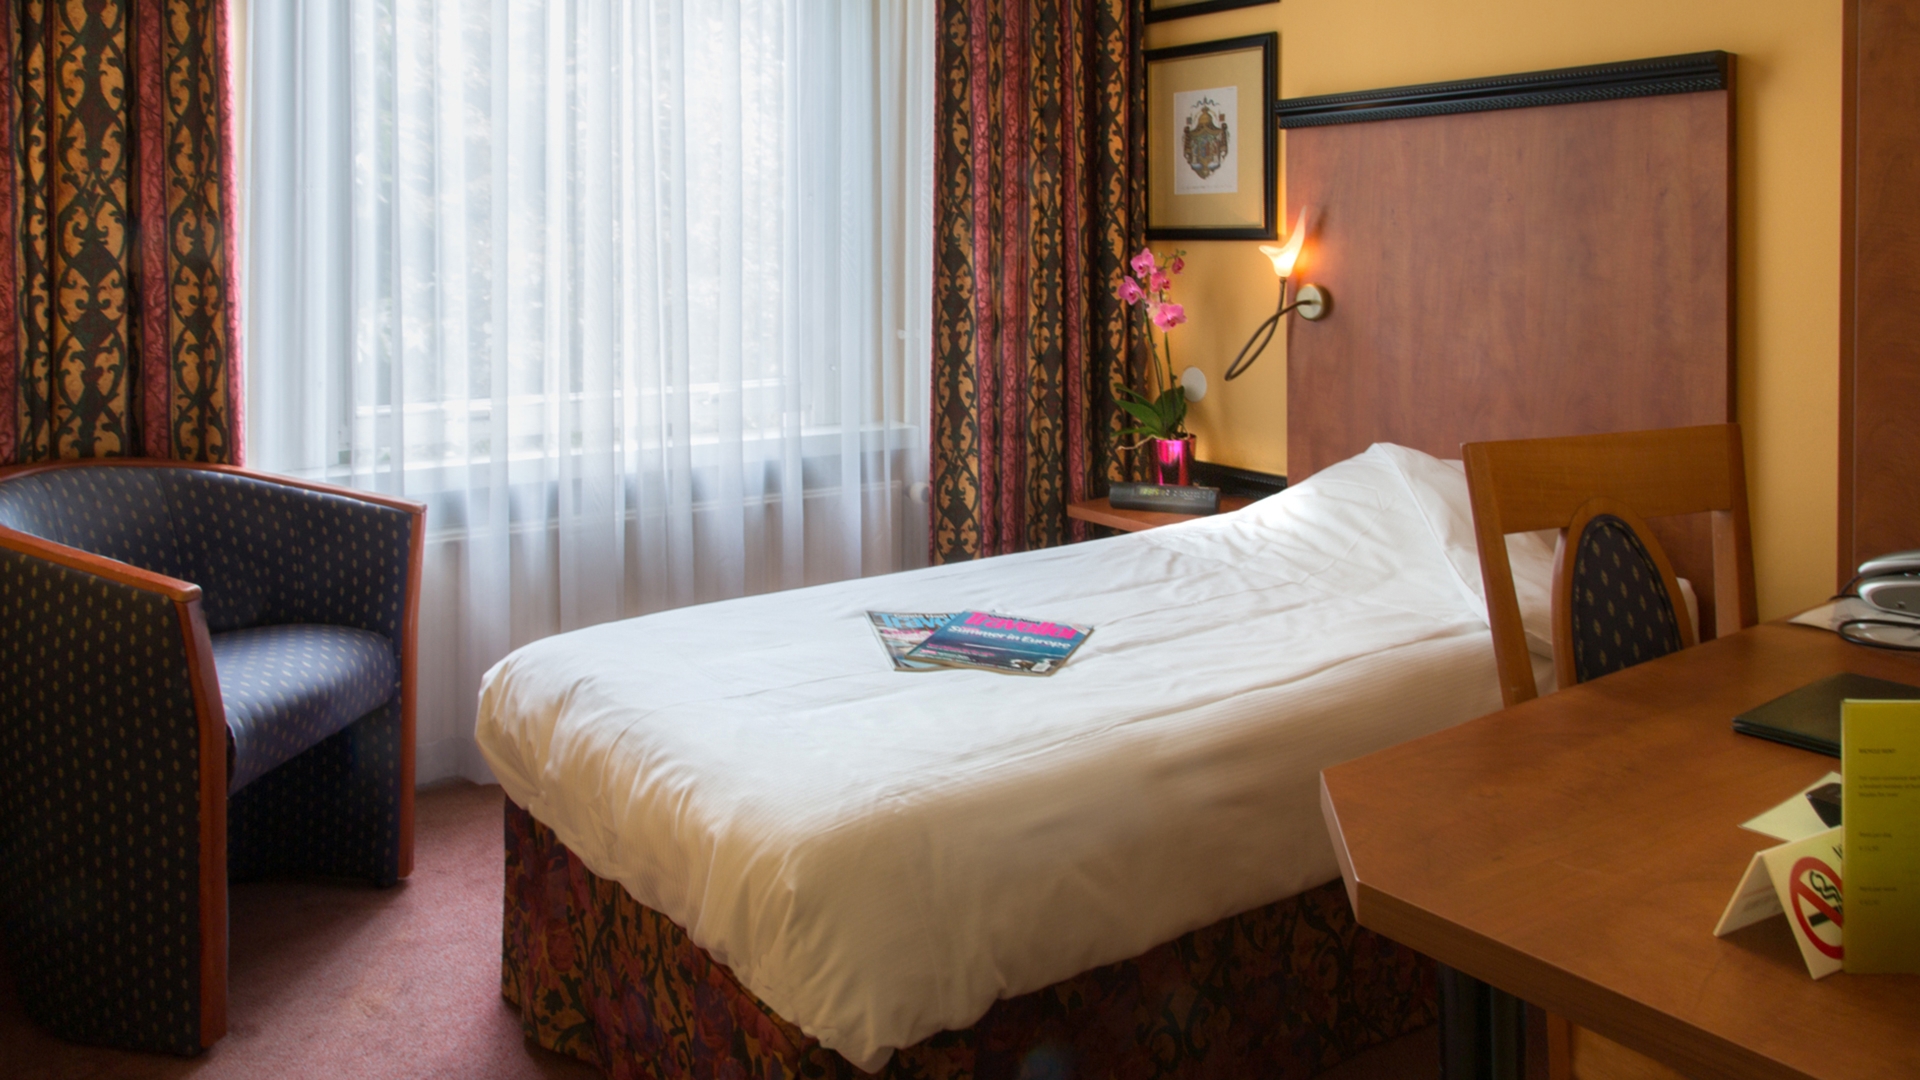 Hotel Ravel <br/>82.50 ew <br/> <a href='http://vakantieoplossing.nl/outpage/?id=61ee6edf322d3f03714caea9d786f51c' target='_blank'>View Details</a>